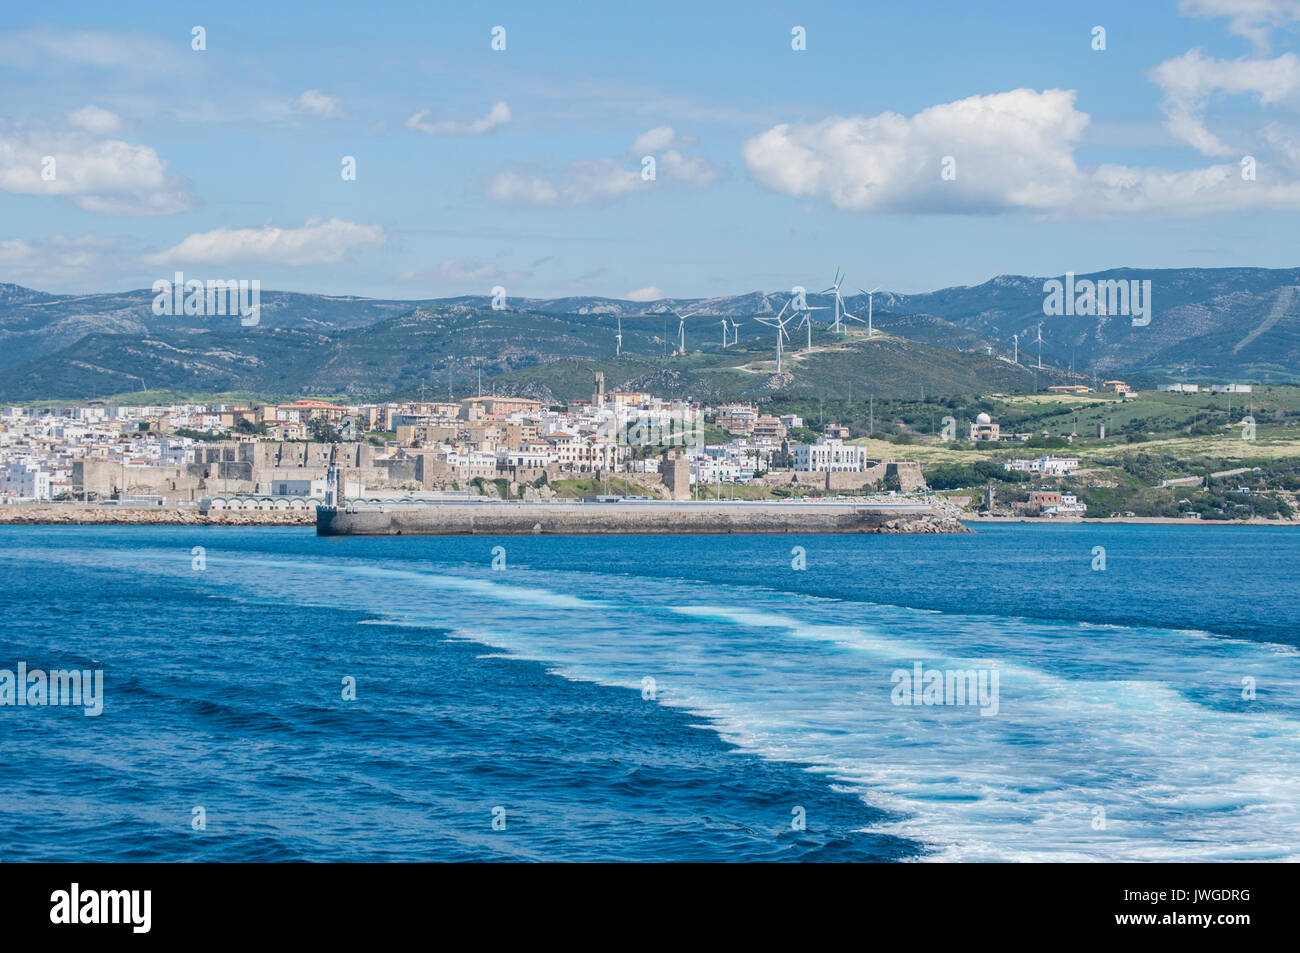 Tarifa: skyline seen from the Strait of Gibraltar that connects Spain to Morocco, the stretch of sea that joins Atlantic Ocean to Mediterranean Sea Stock Photo